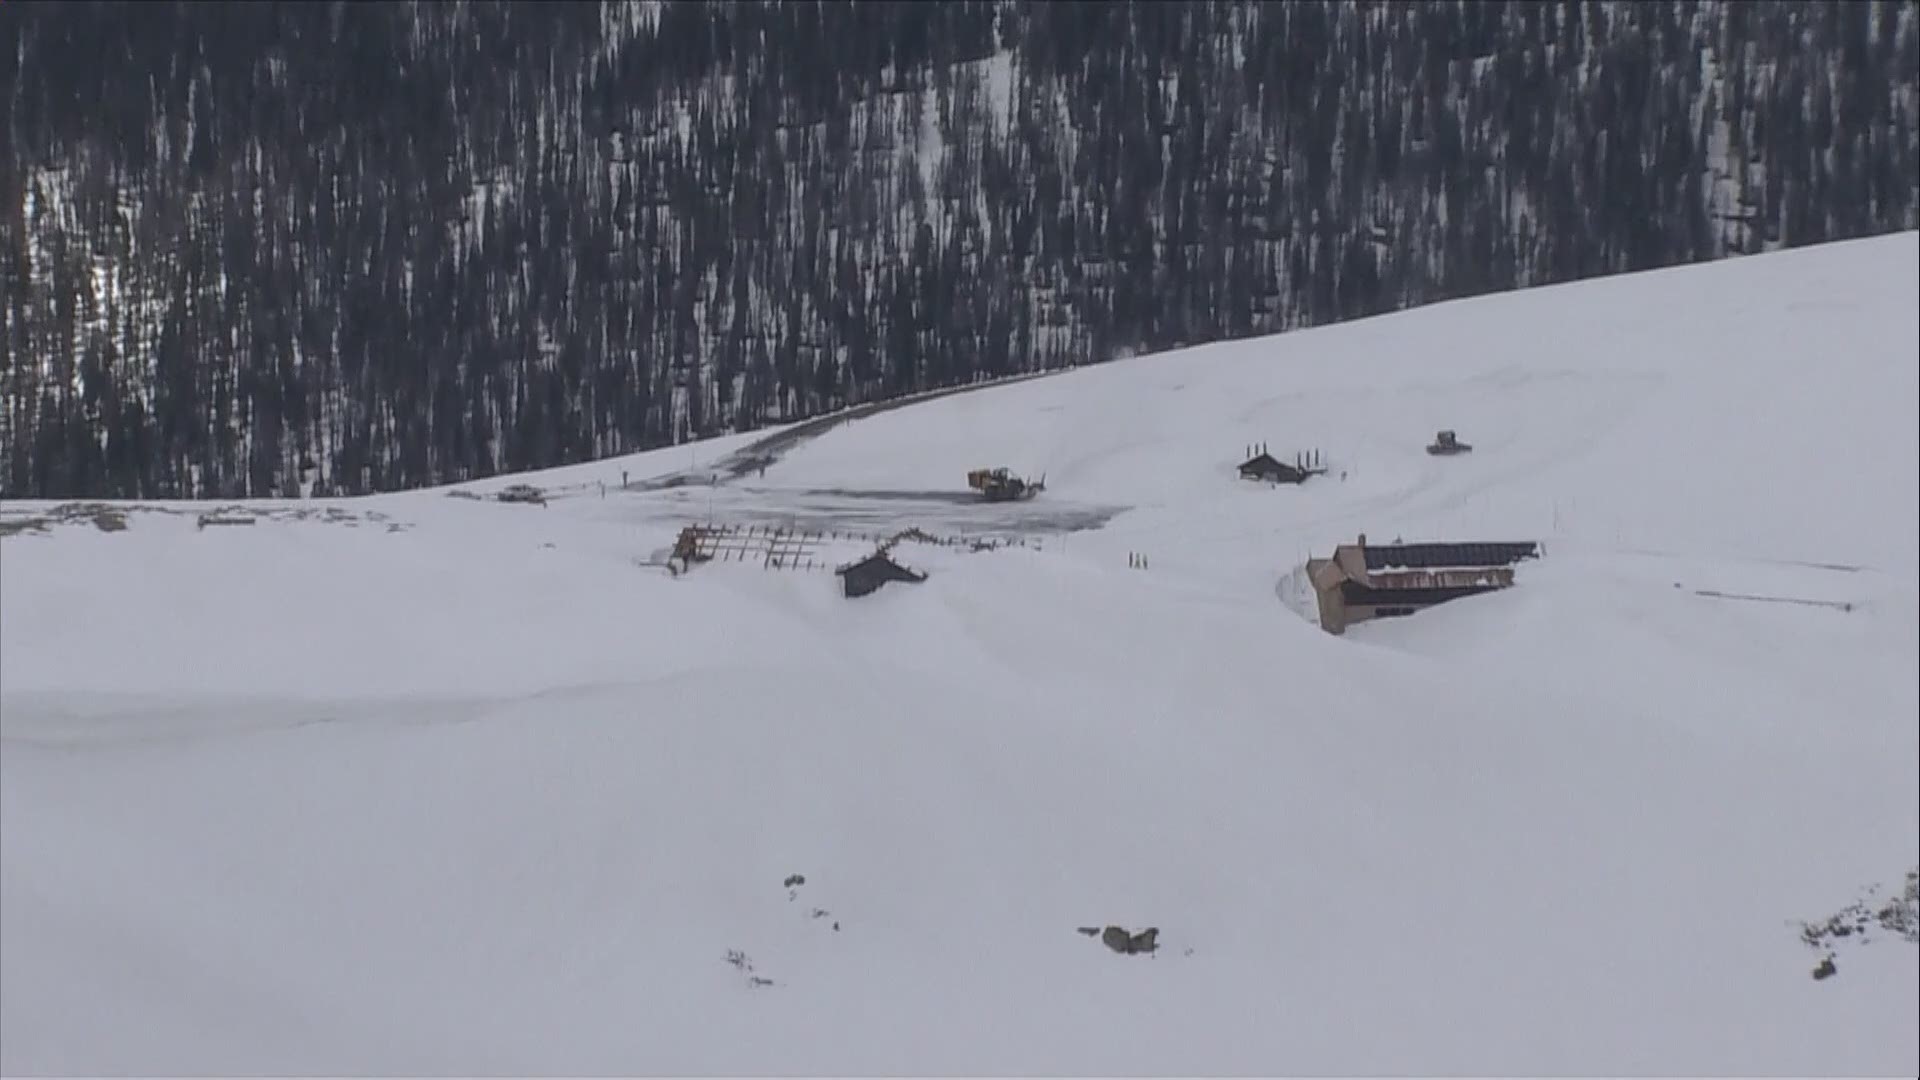 The Alpine Visitors Center at Rocky Mountain National Park is still nearly buried in snow. Photos and video taken along Trail Ridge Road inside the park show what snowplow operators are up against as work to get the road open for the season.